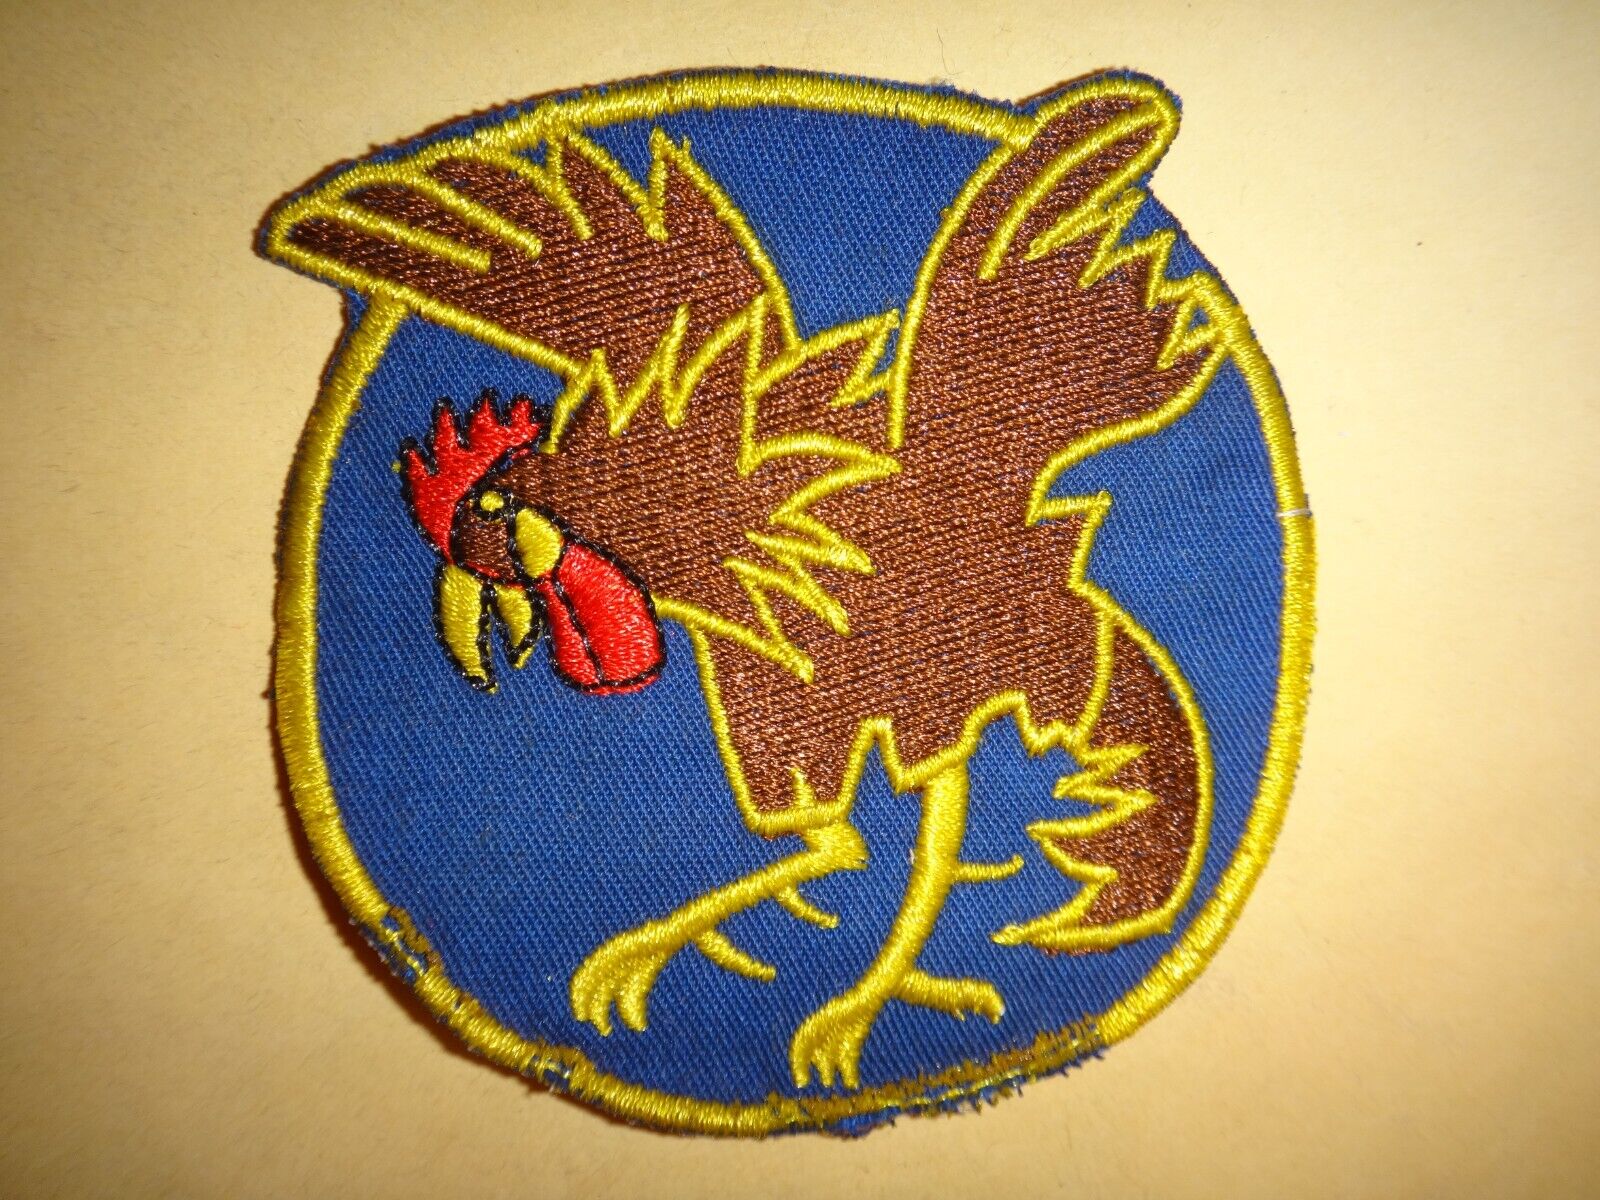 Cold War US Air Force 29th FIGHTER INTERCEPTOR SQUADRON Patch